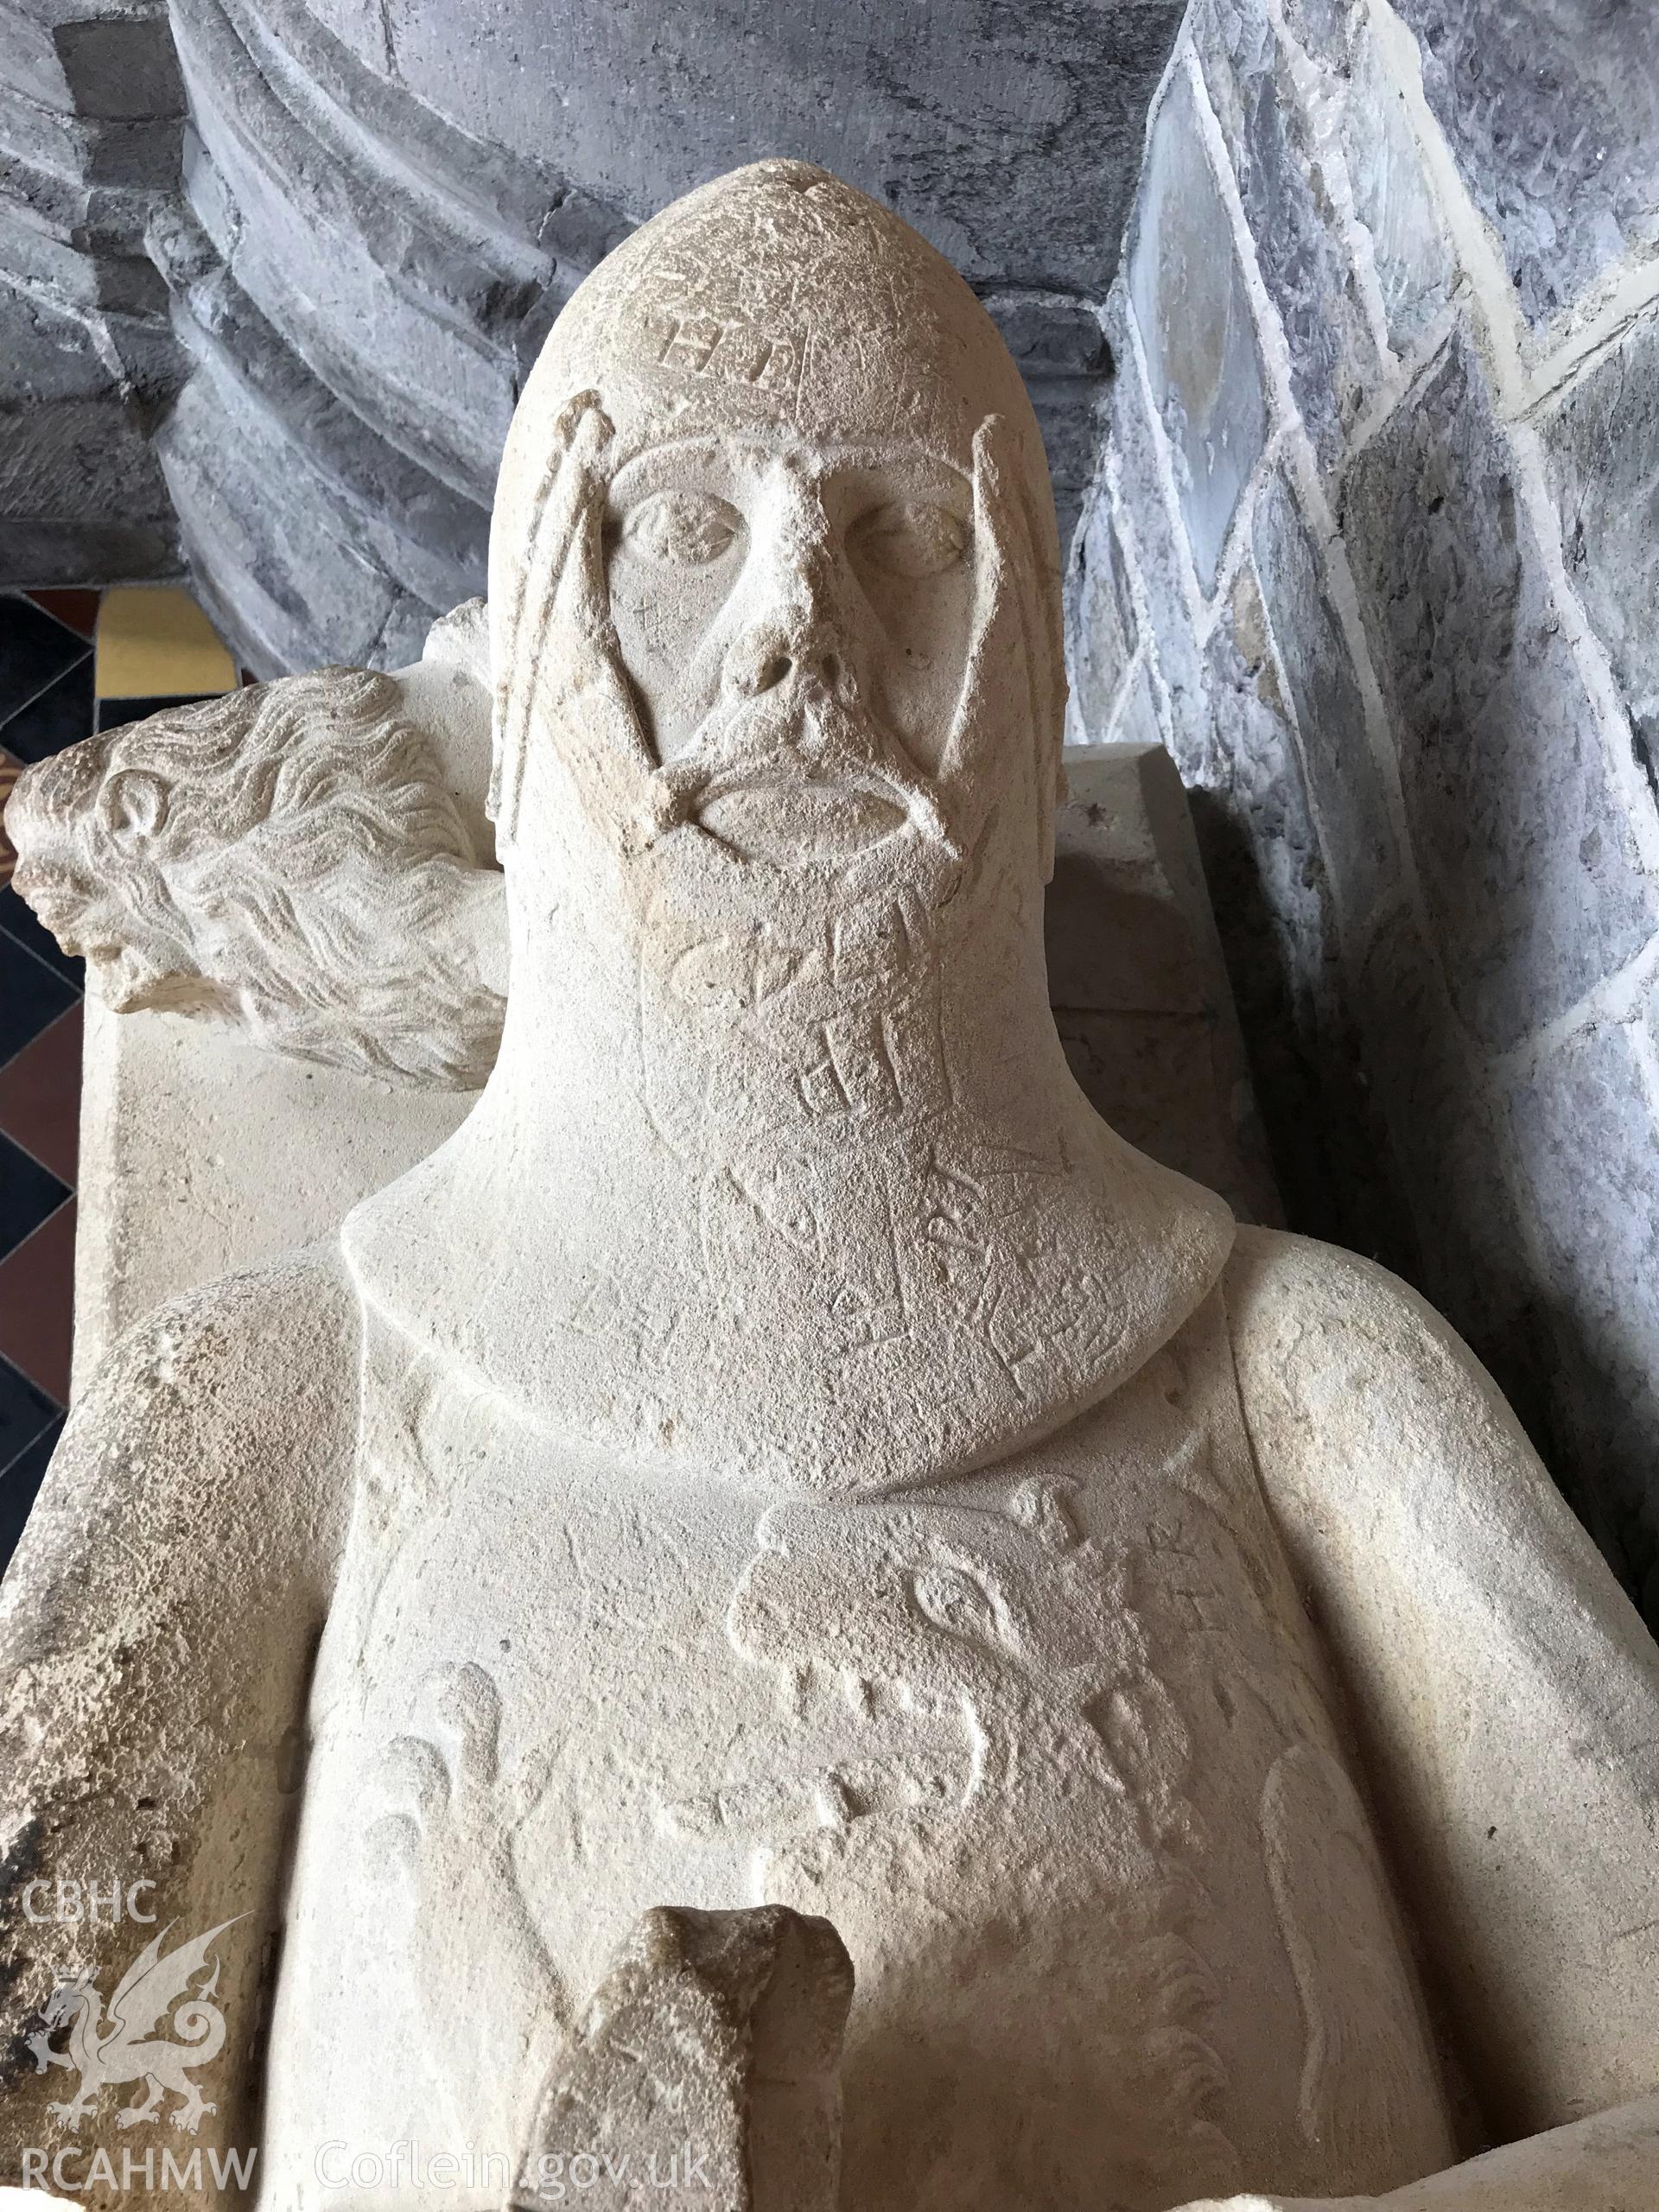 Colour photo showing effigy of Lord Rhys, taken by Paul R. Davis, 2018.